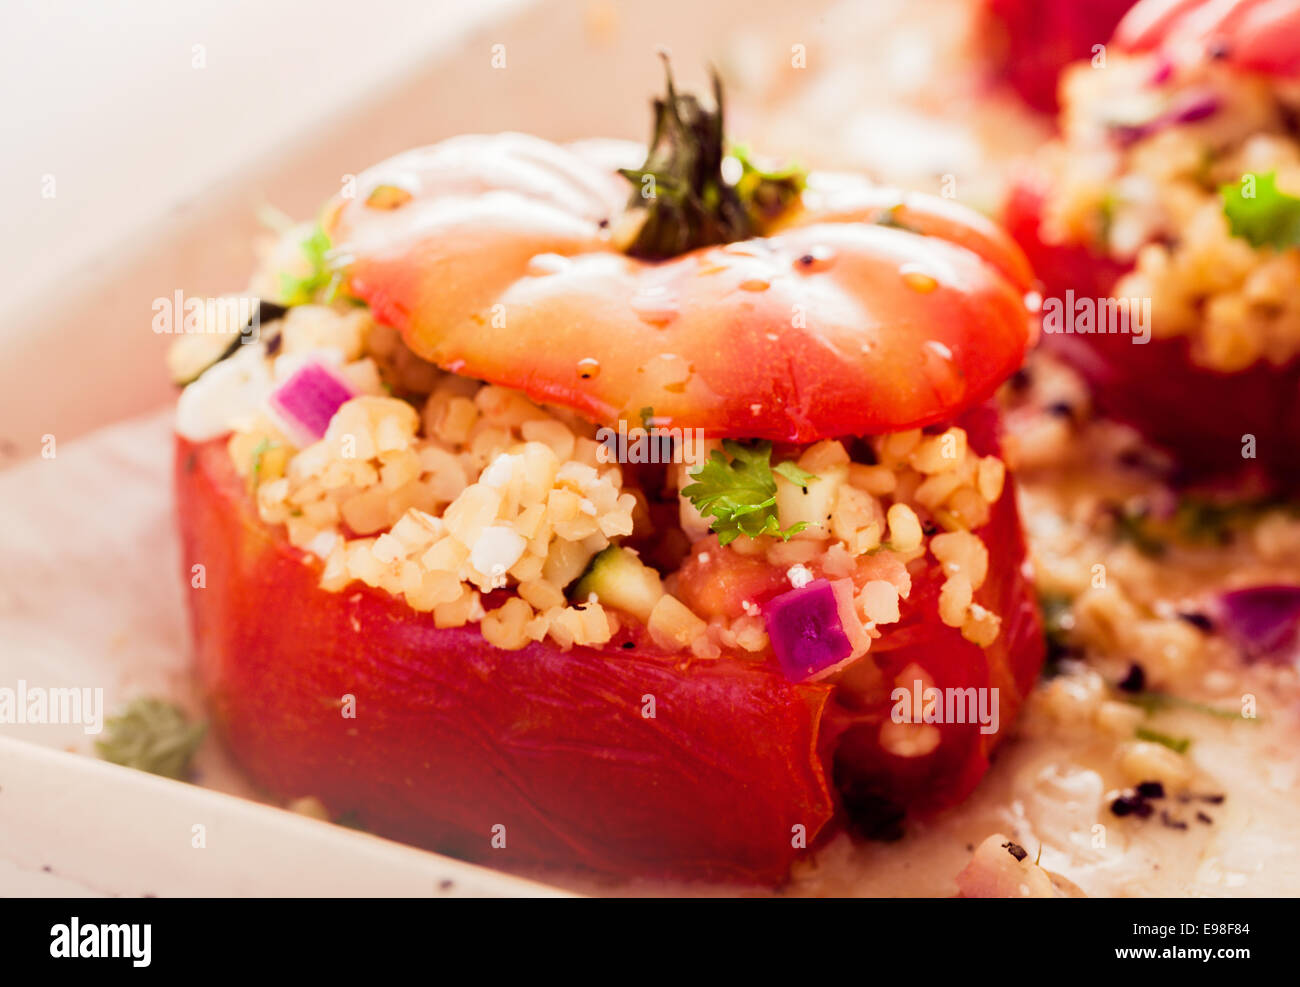 Delicious oven baked stuffed tomatoes filled with a couscous grain, onion, and herbs for a healthy appetizer or vegetarian meal Stock Photo